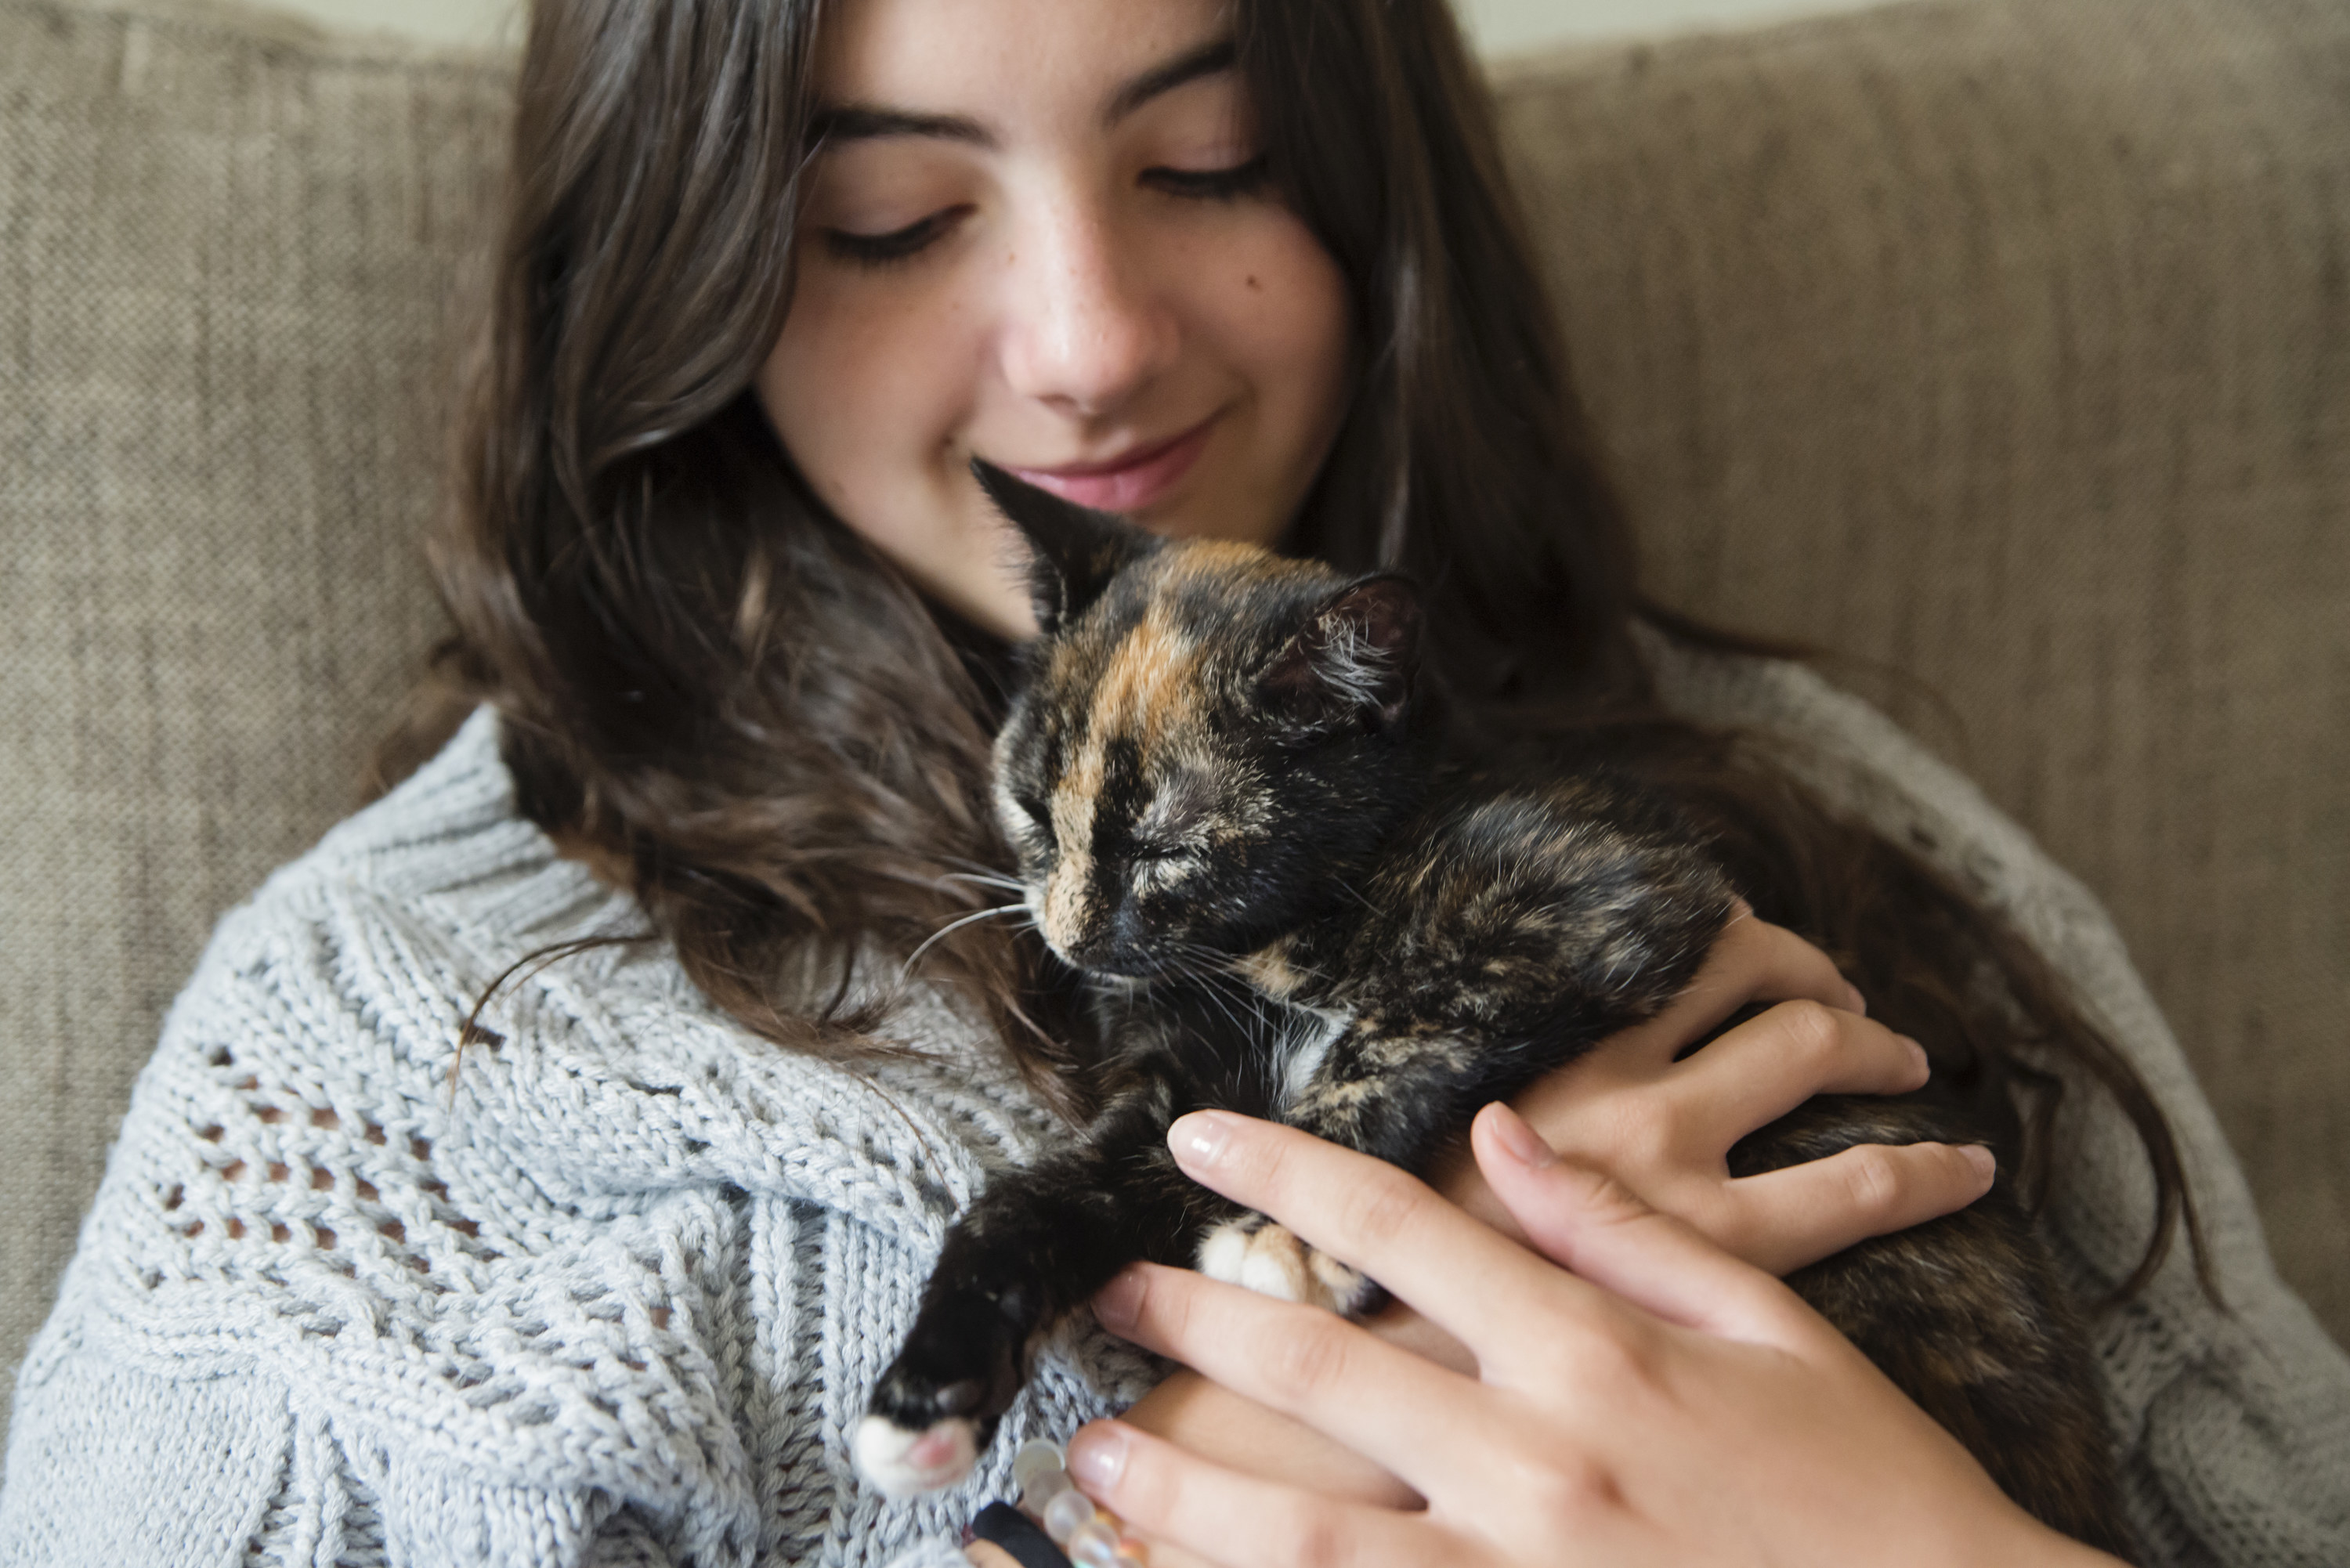 Young woman holding a cat close to her chest